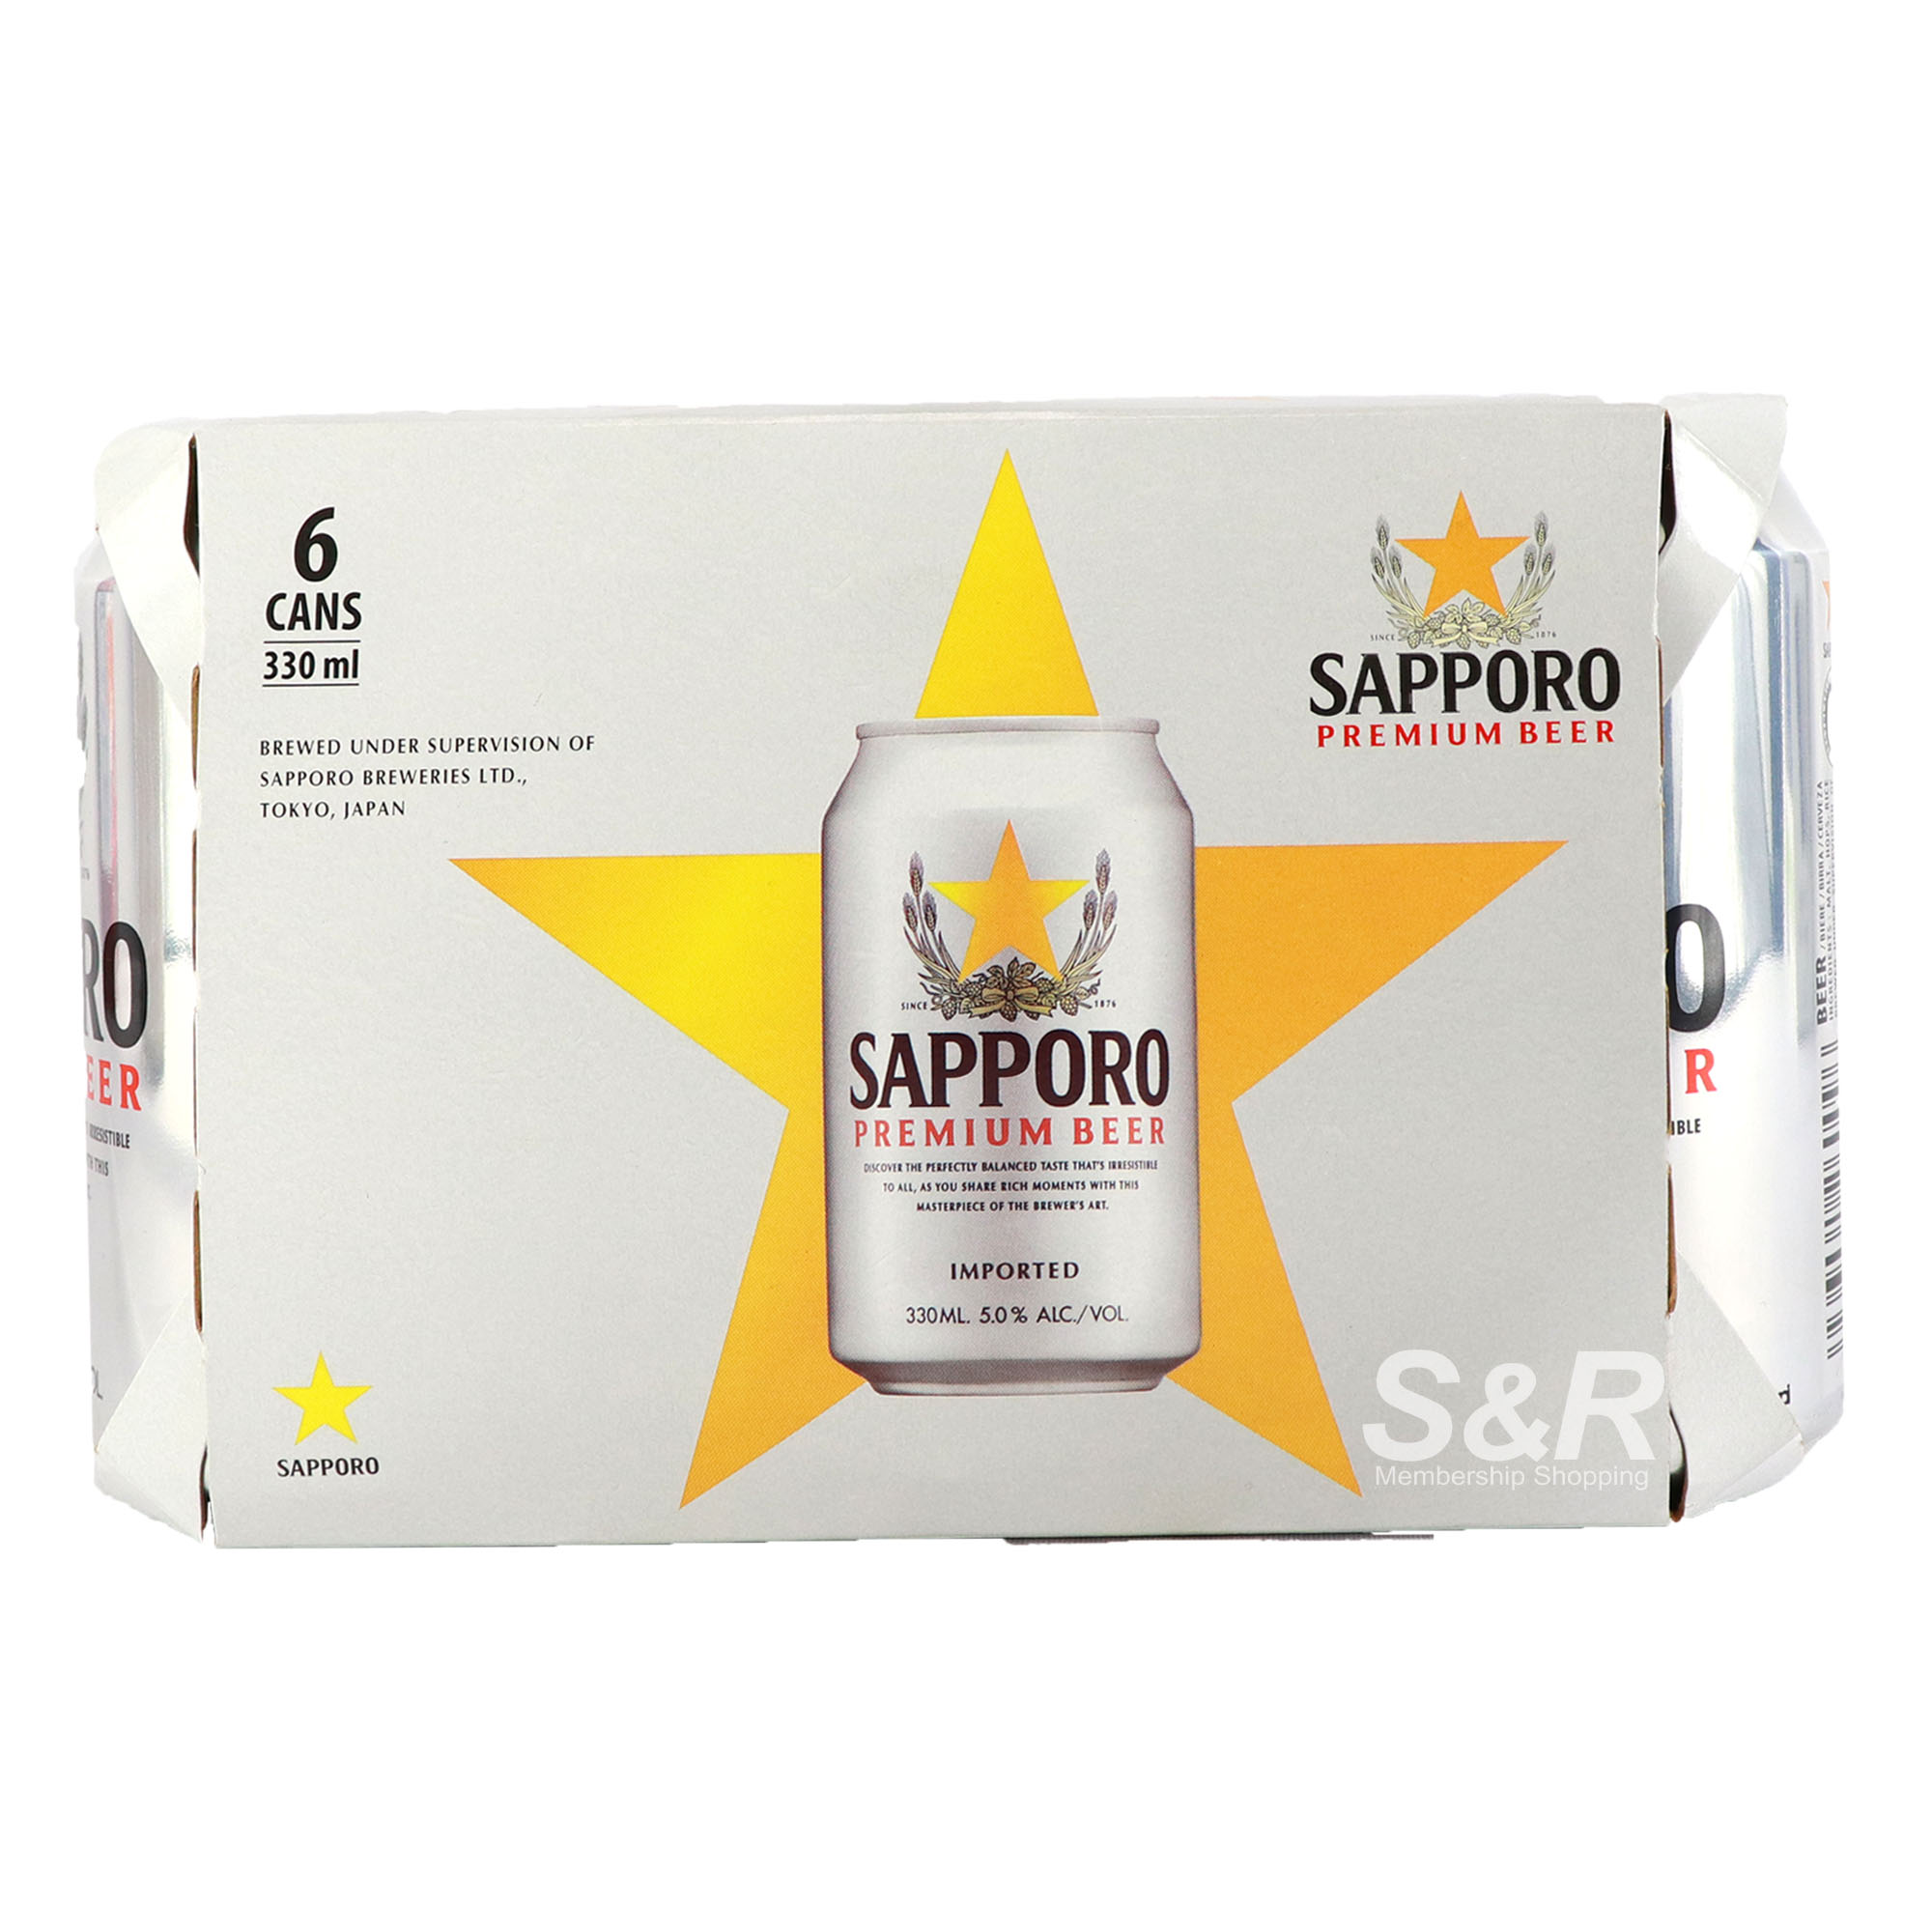 Sapporo Premium Beer 6 cans